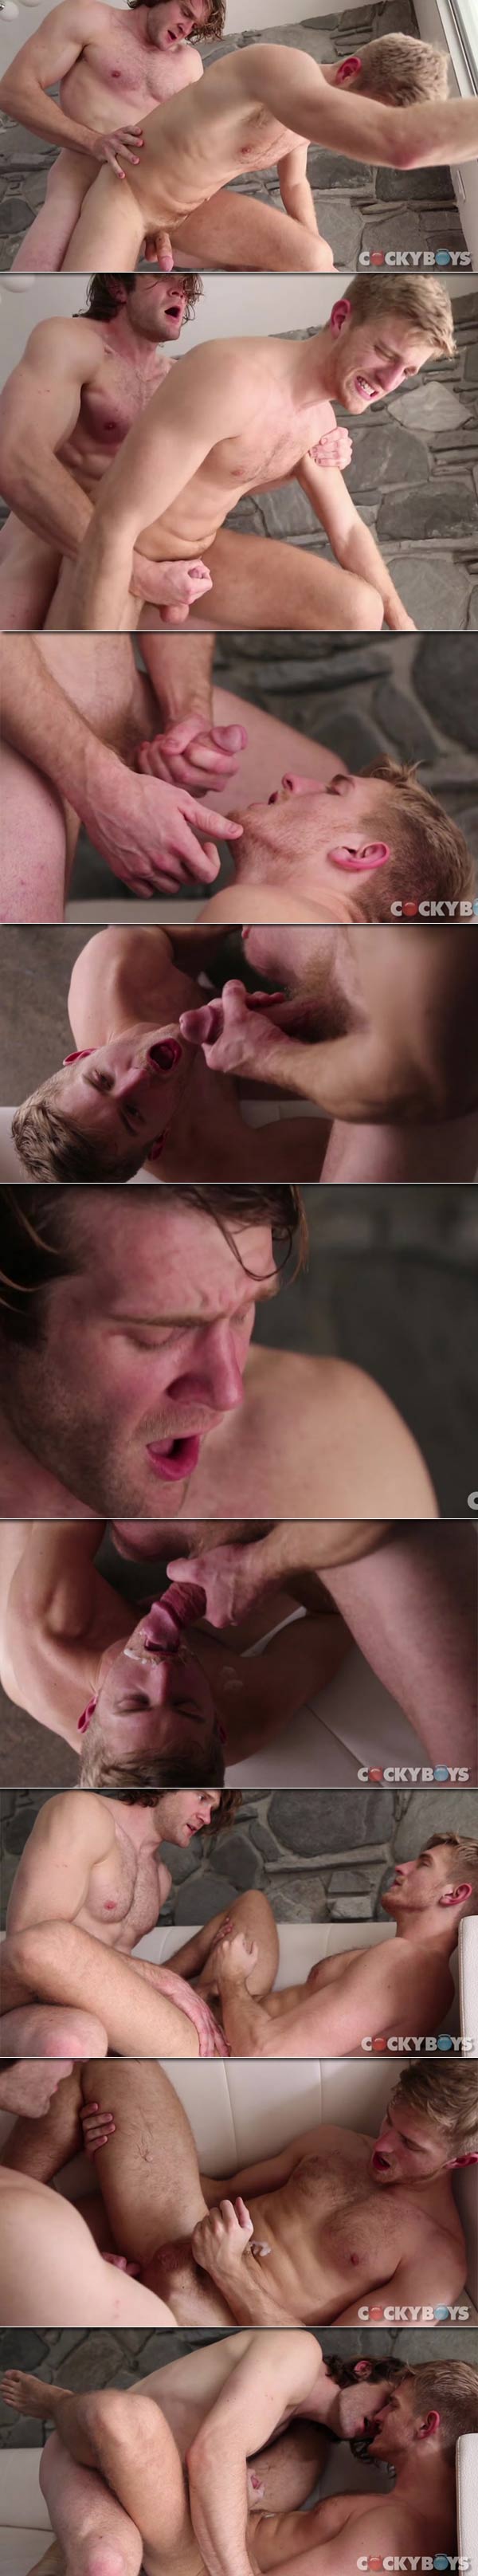 Colby Keller Hammers Levi Michaels at CockyBoys.com